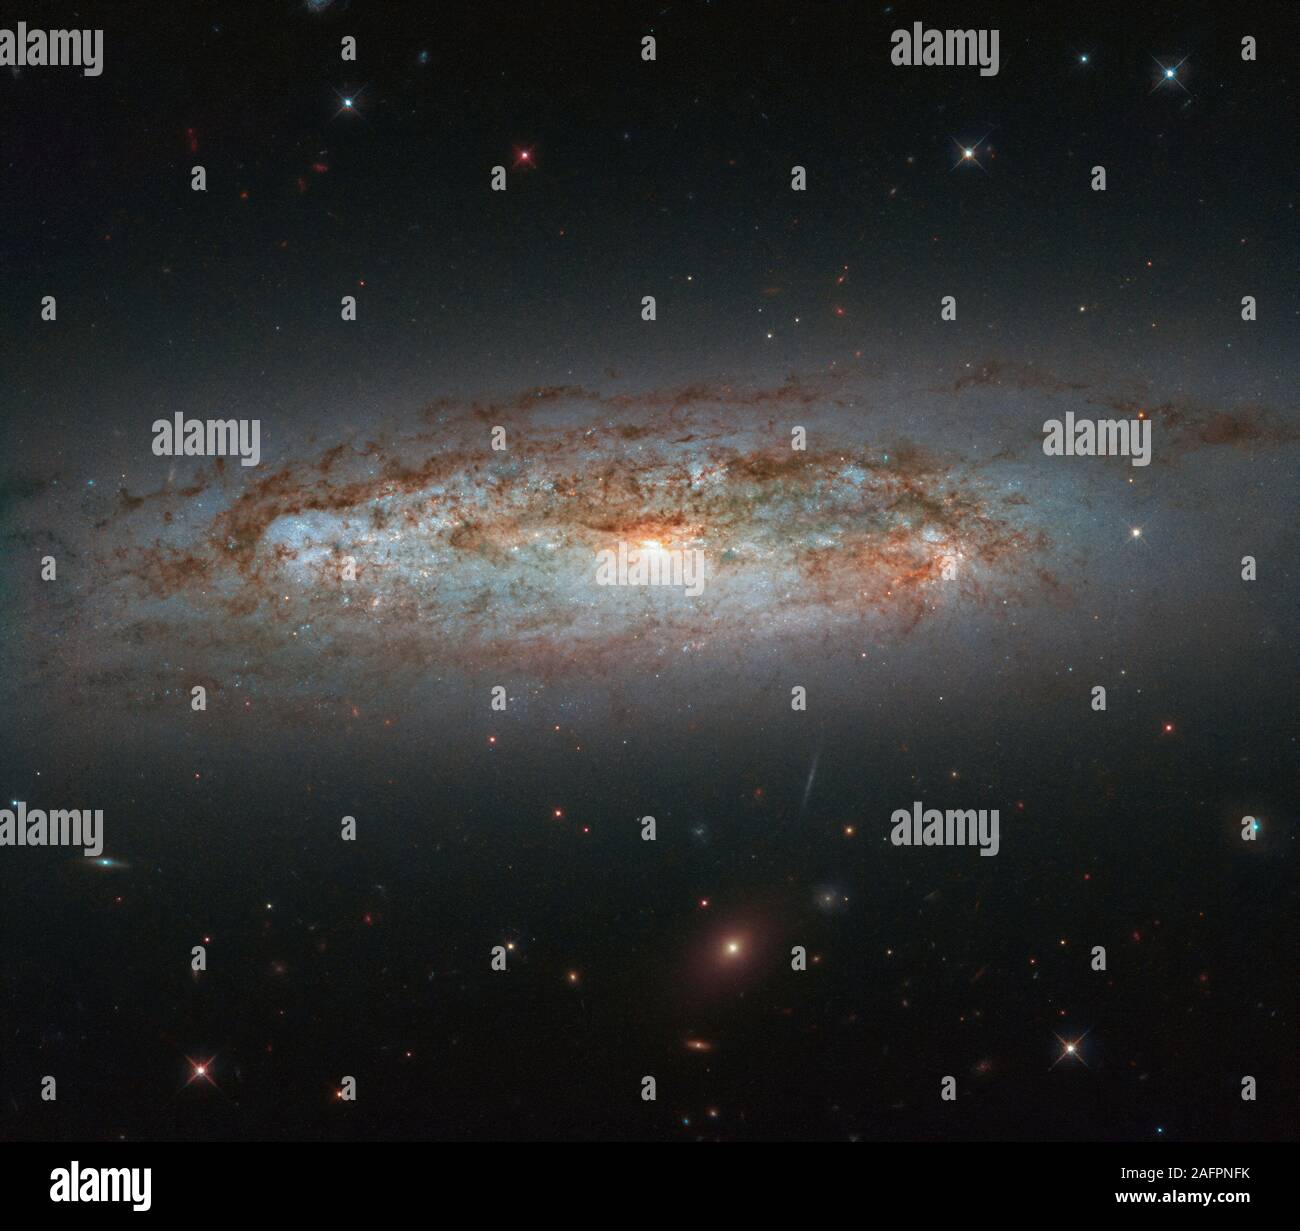 Washington, United States. 16th Dec, 2019. This image, comprised of observations from Hubble's Wide Field Camera 3, shows the NGC 3175 galaxy, which is located around 50 million light-years away in the constellation of Antlia (the Air Pump). Slicing across the frame in this image from the NASA/ESA Hubble Space Telescope, the galaxy is a mix of bright patches of glowing gas, dark lanes of dust, bright core, and whirling, pinwheeling arms coming together to paint a beautiful celestial scene. NASA/ESA/UPI Credit: UPI/Alamy Live News Stock Photo